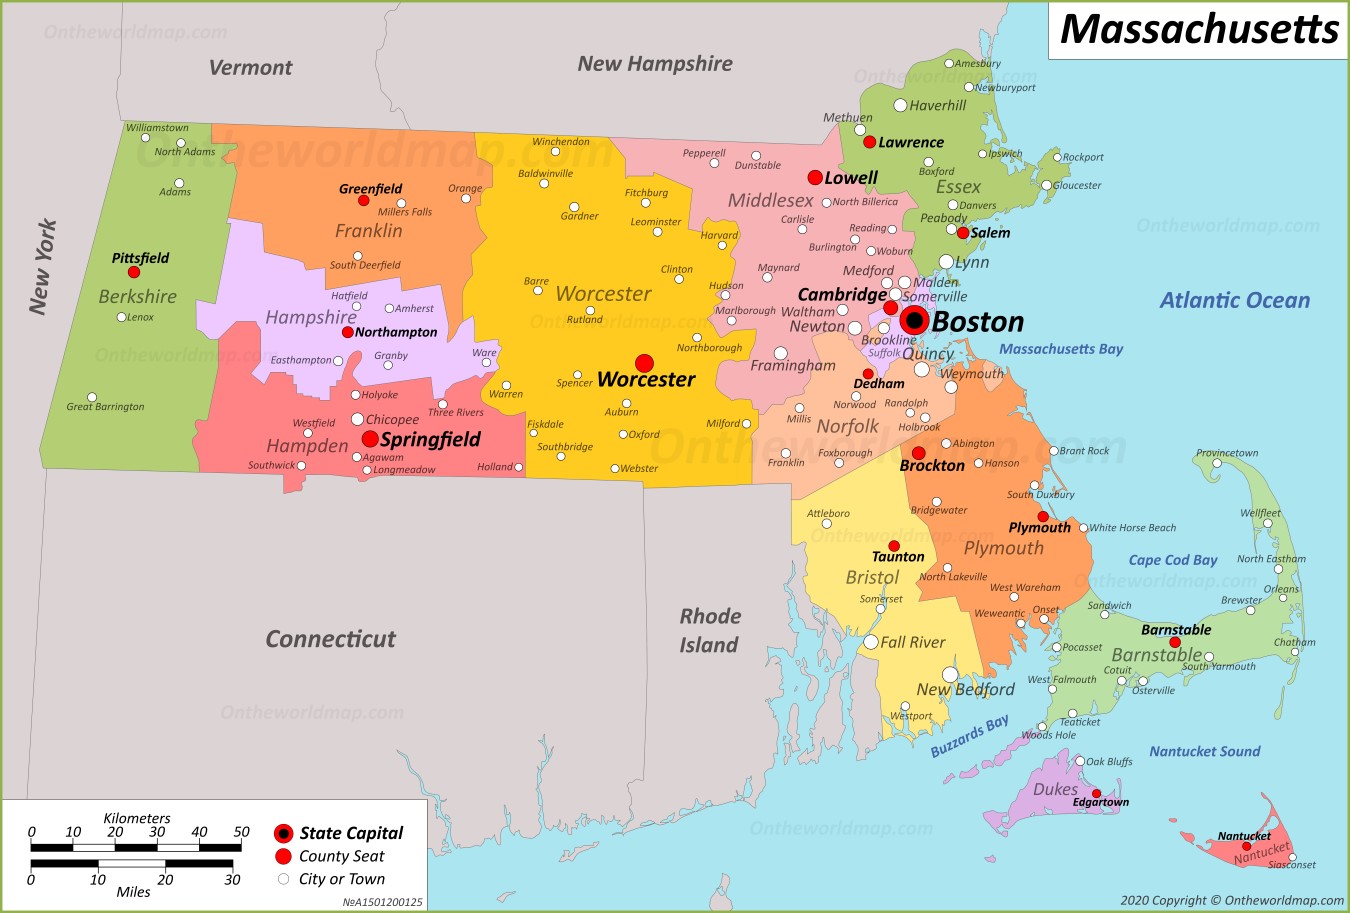 Map of Massachusetts showing Service area for Targeted Web Design including cities of services Andover, North Andover, Burlington, Dracut, Billerica, Tewksbury, Reading, North Reading, Wilmington, Winchester, Lawrence, Lowell, and many more